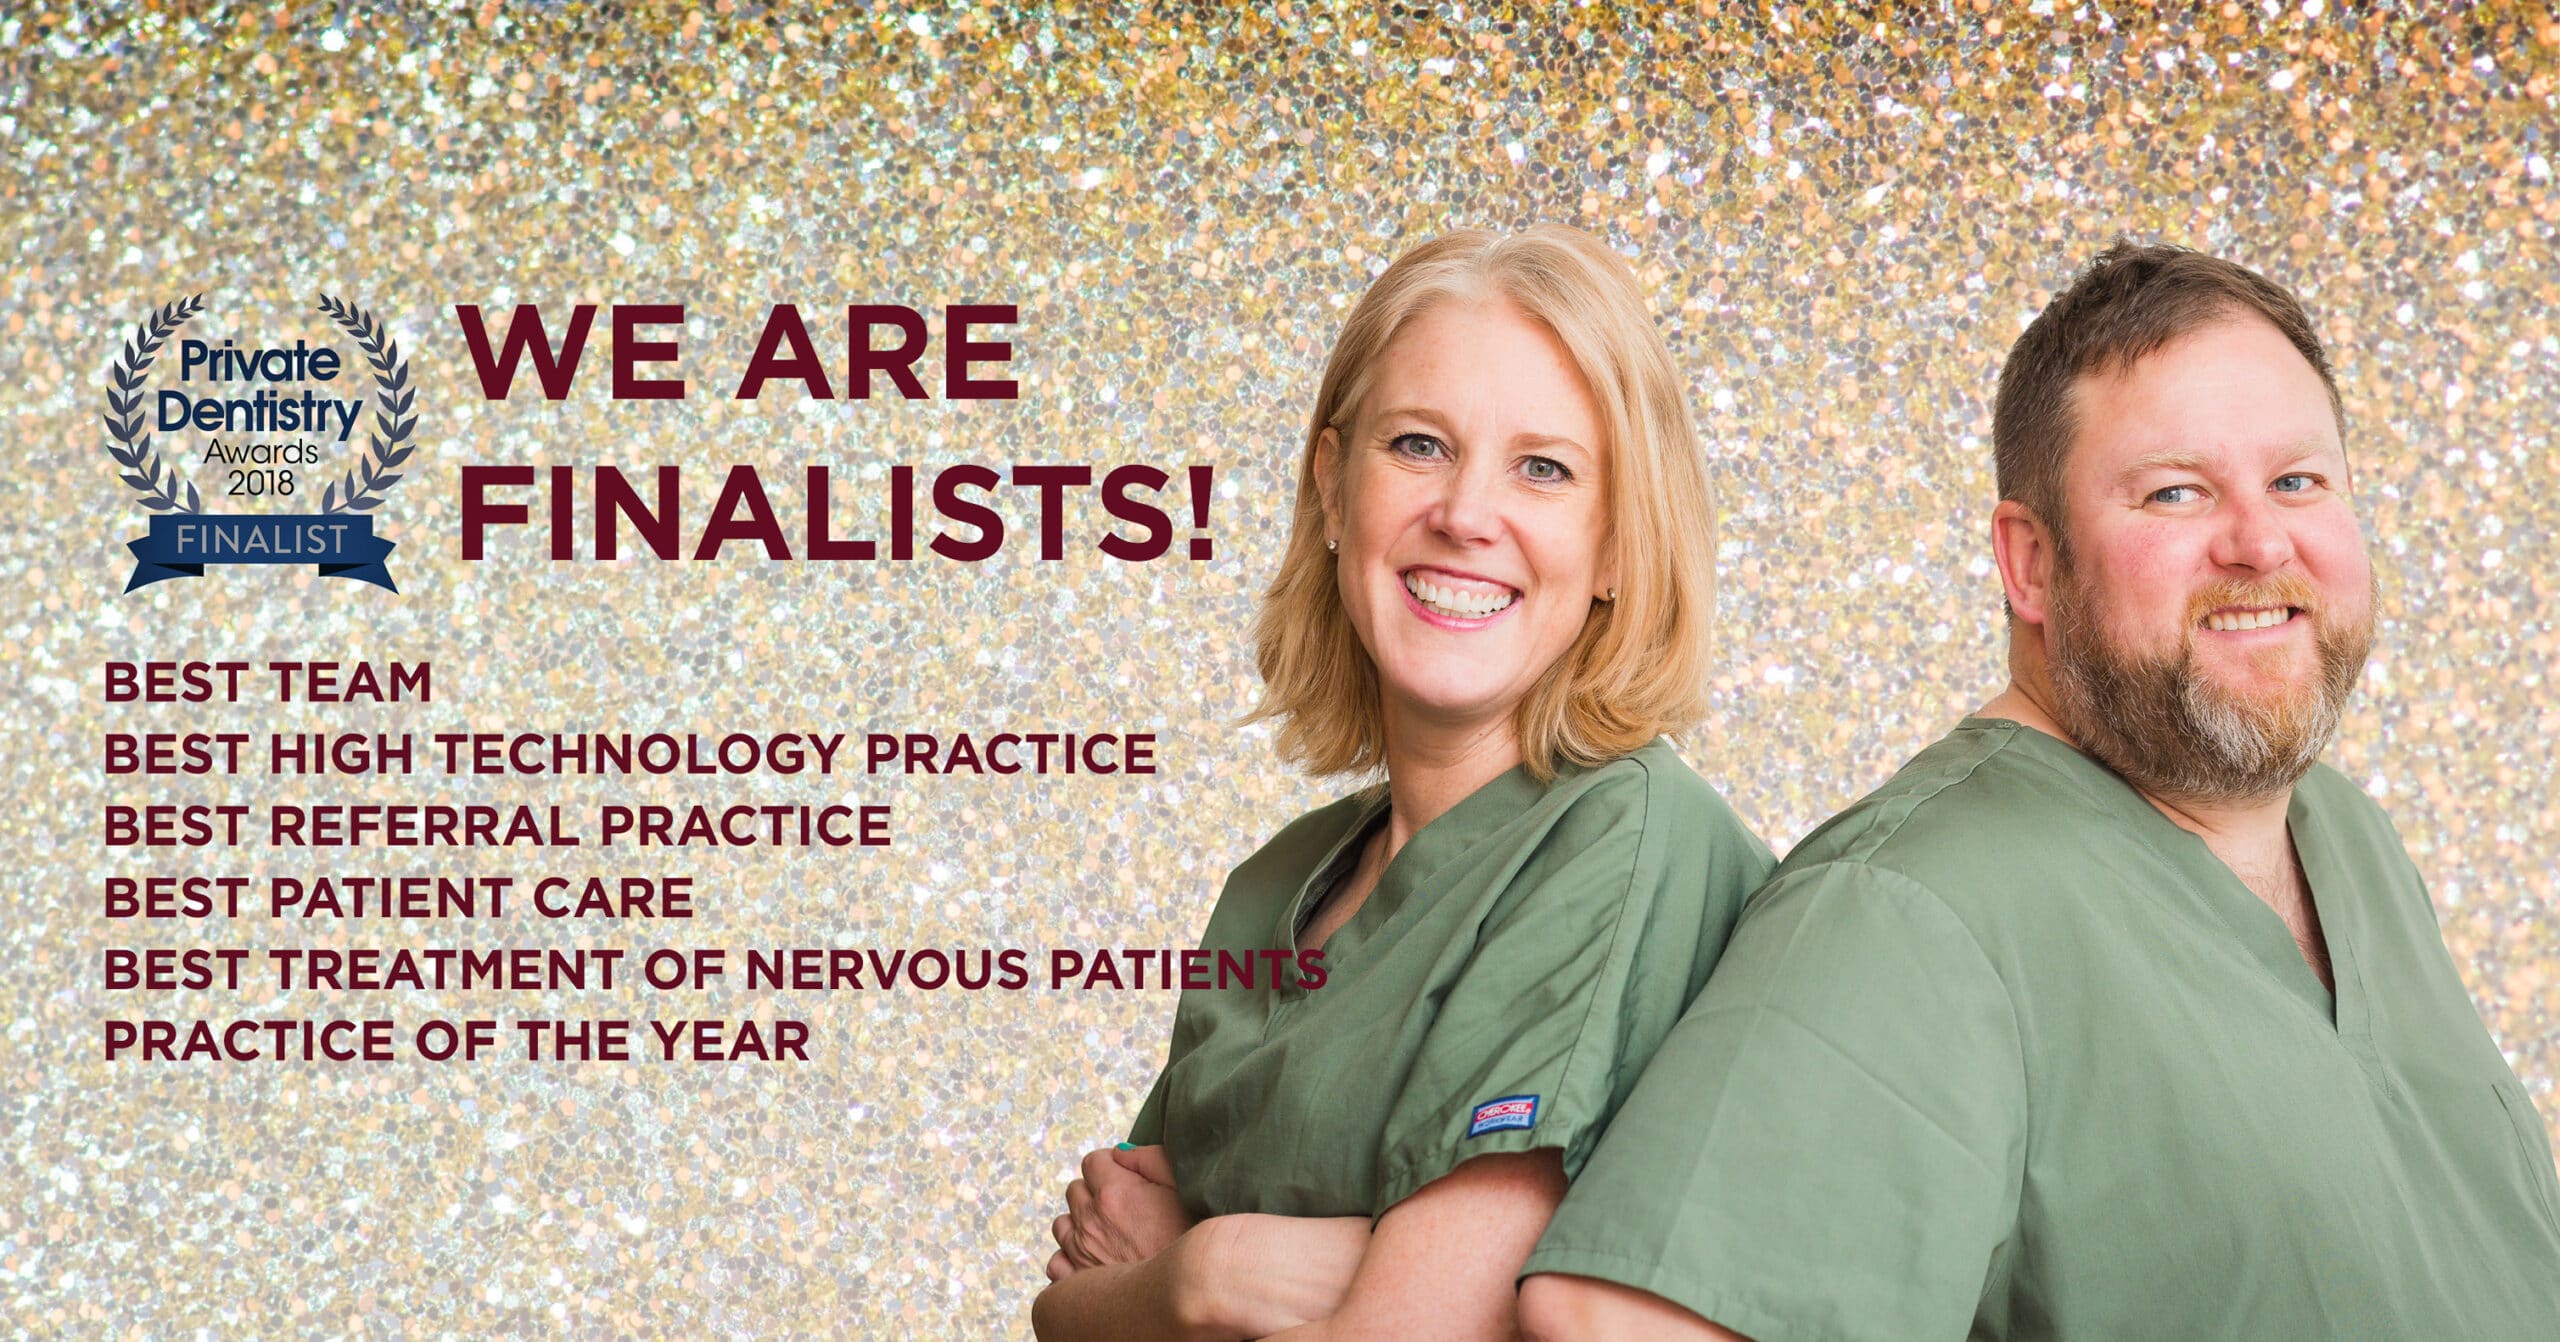 We are finalists - private dentistry awards 2018